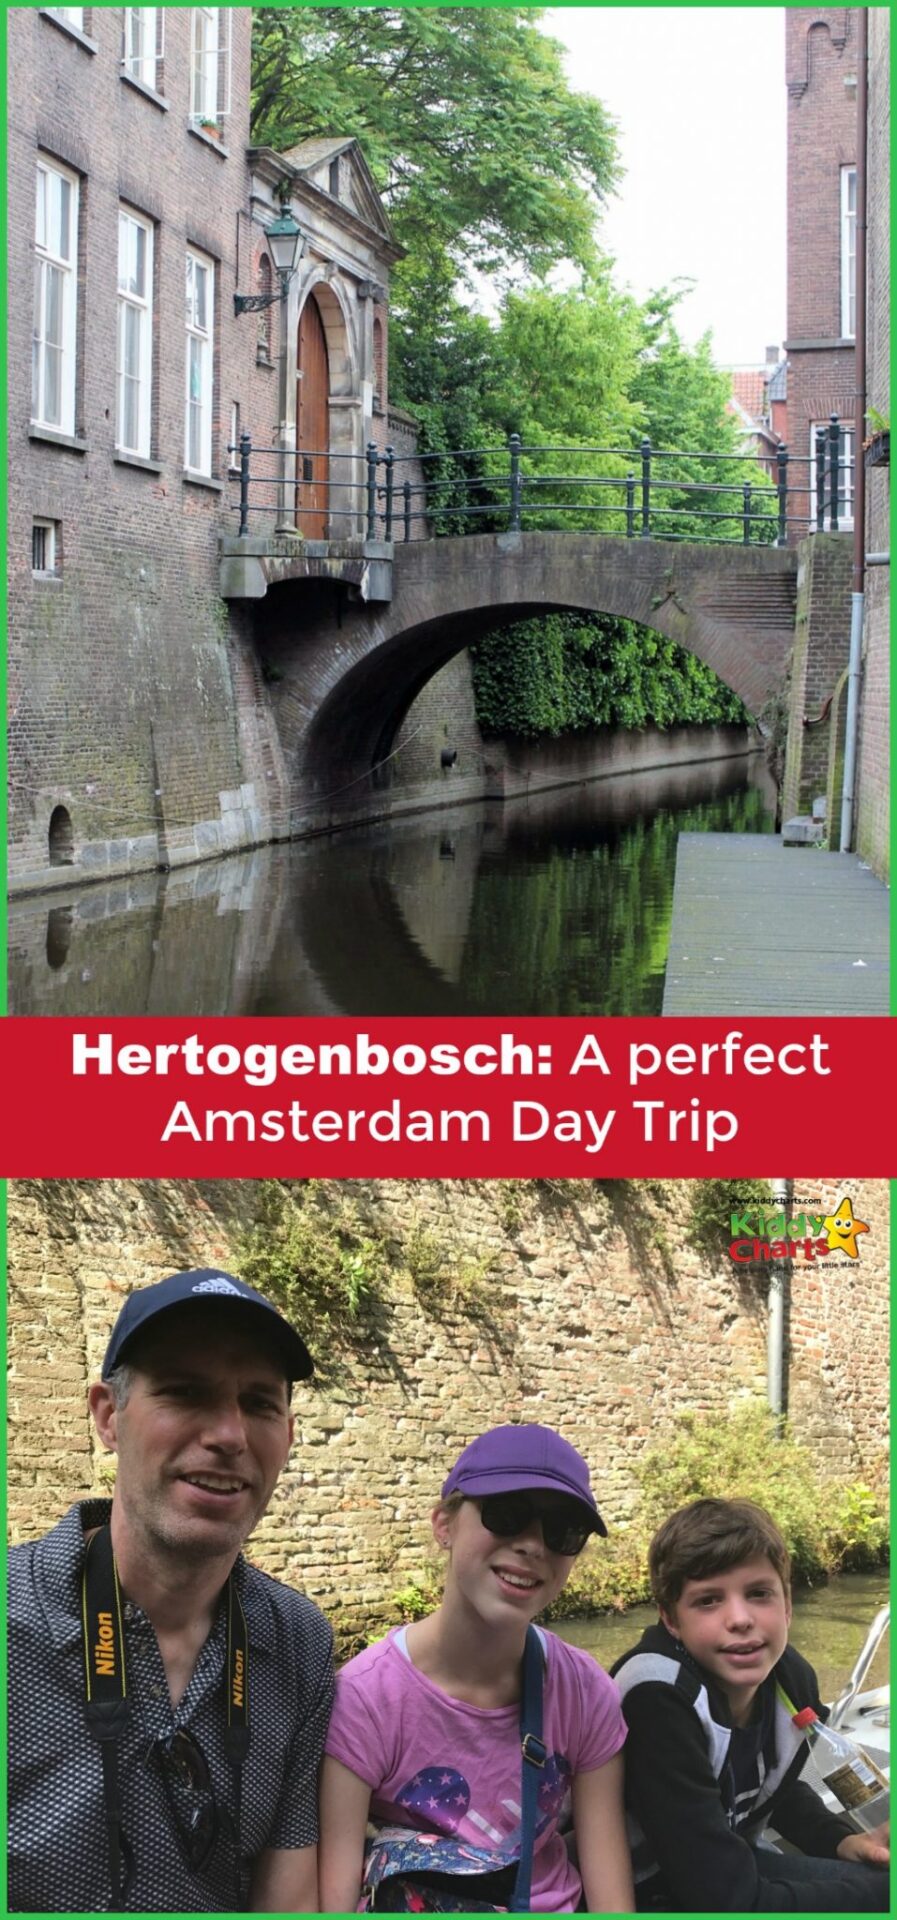 Hertogenbosch is a perfect day trip from Amsterdam, and there is even enough to do for you to want to stay longer too!